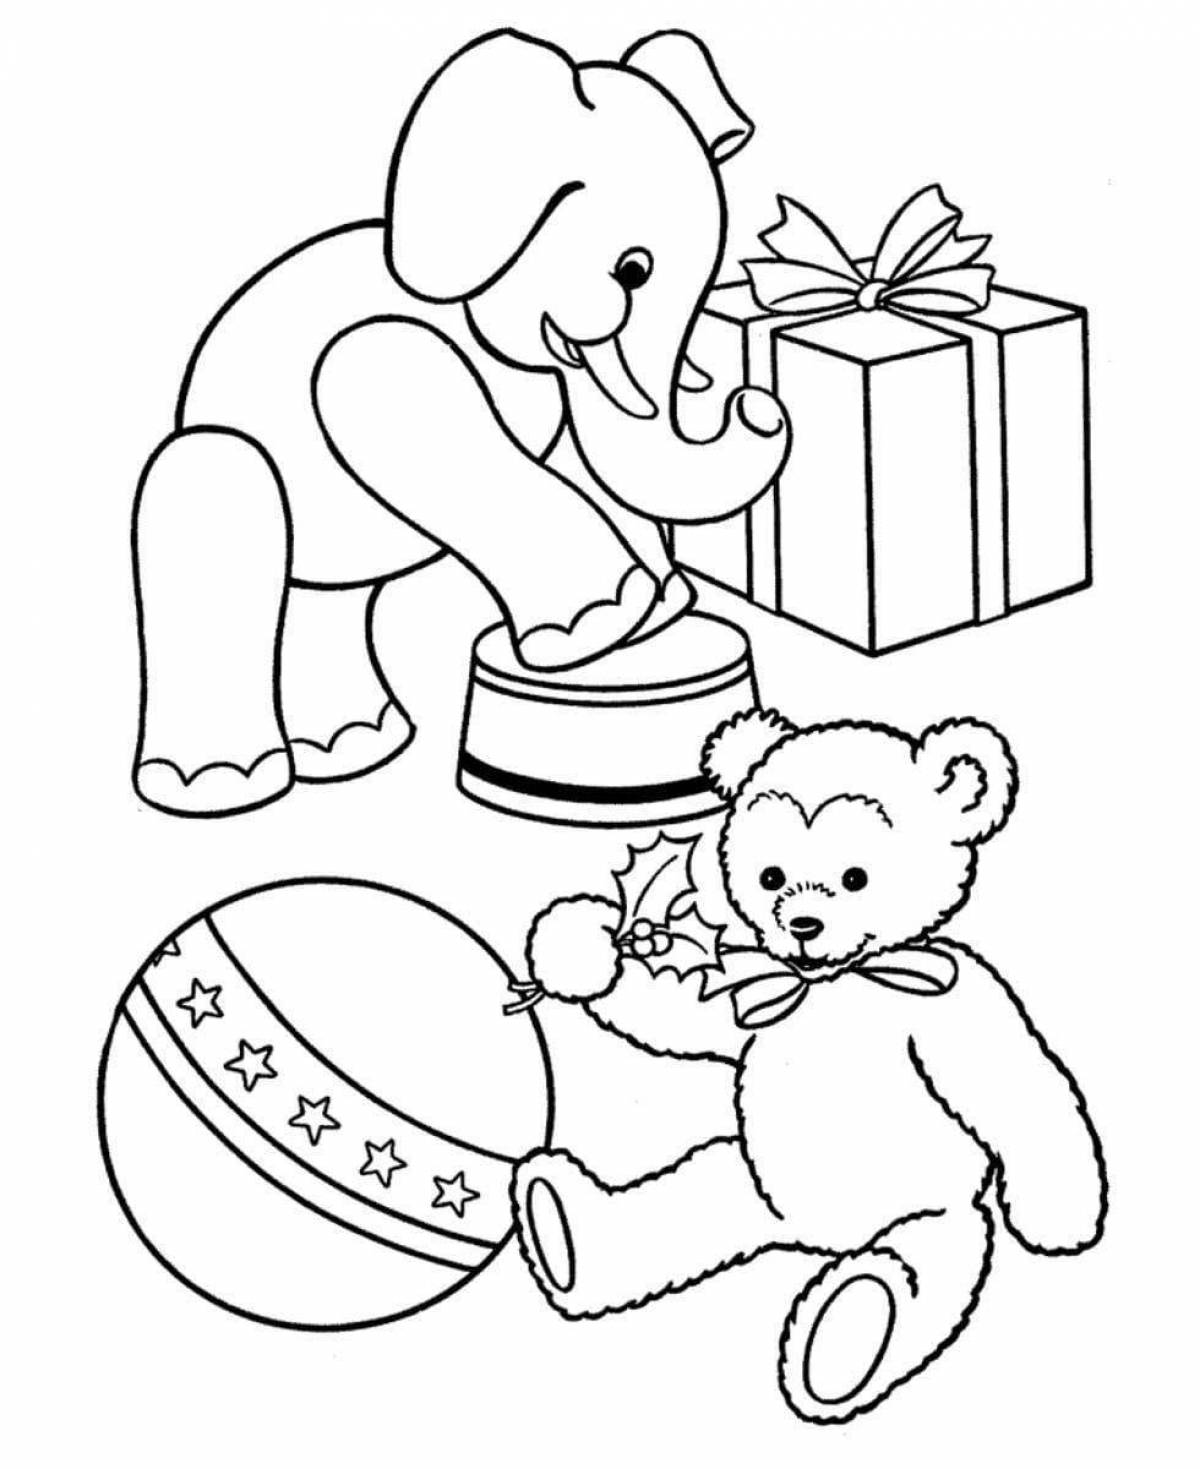 Color-frenzy coloring page for kids 5-6 years old